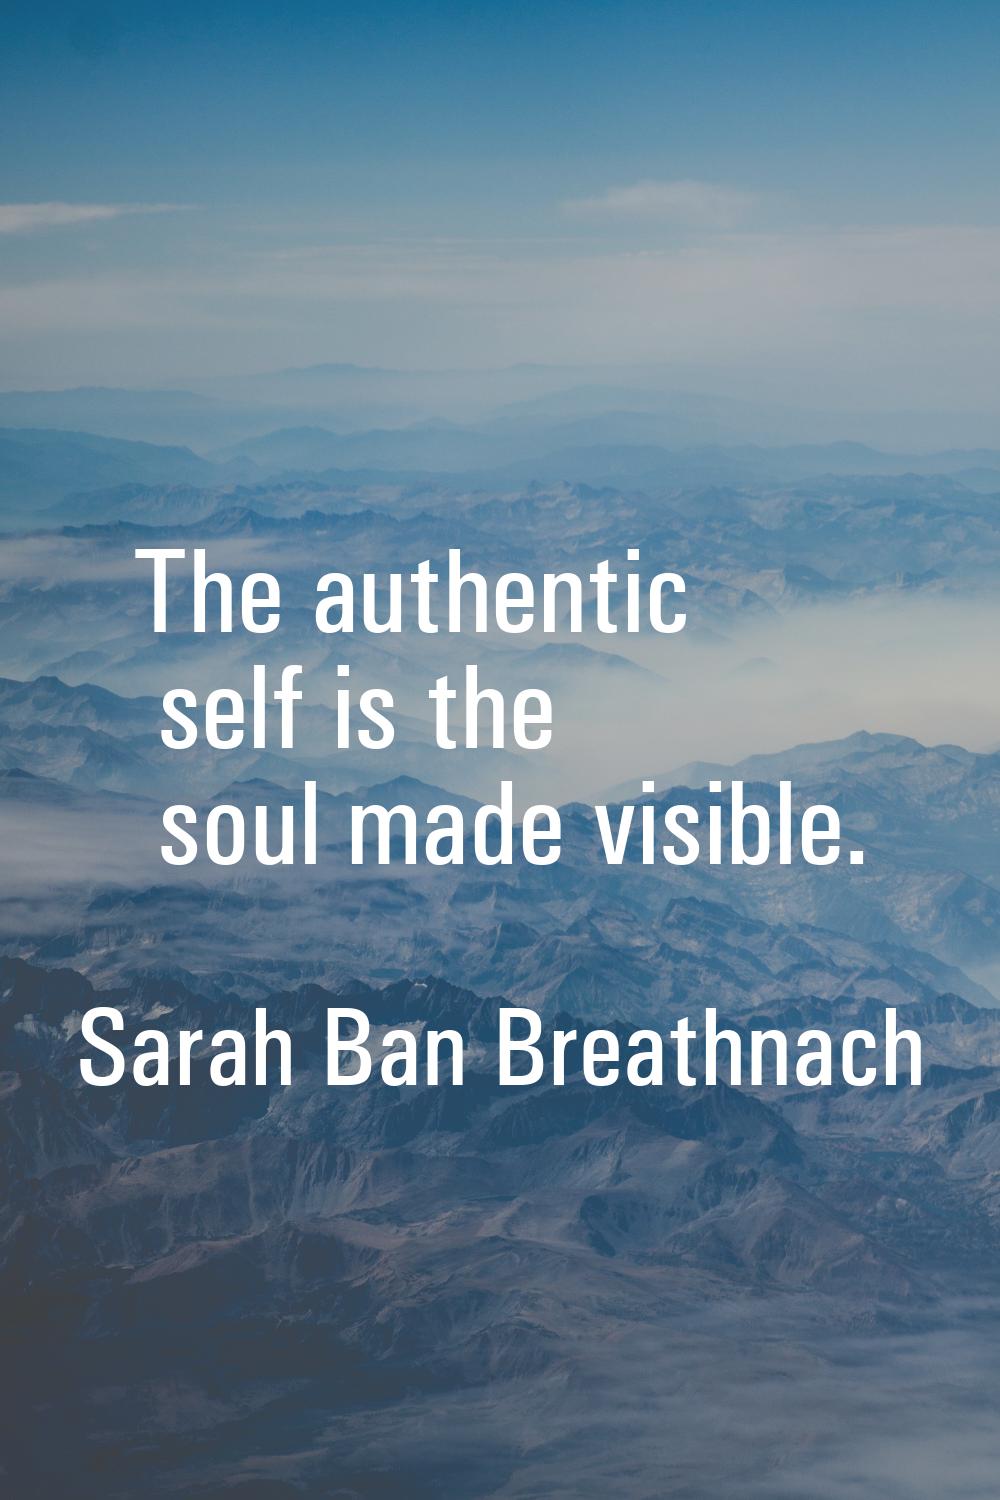 The authentic self is the soul made visible.